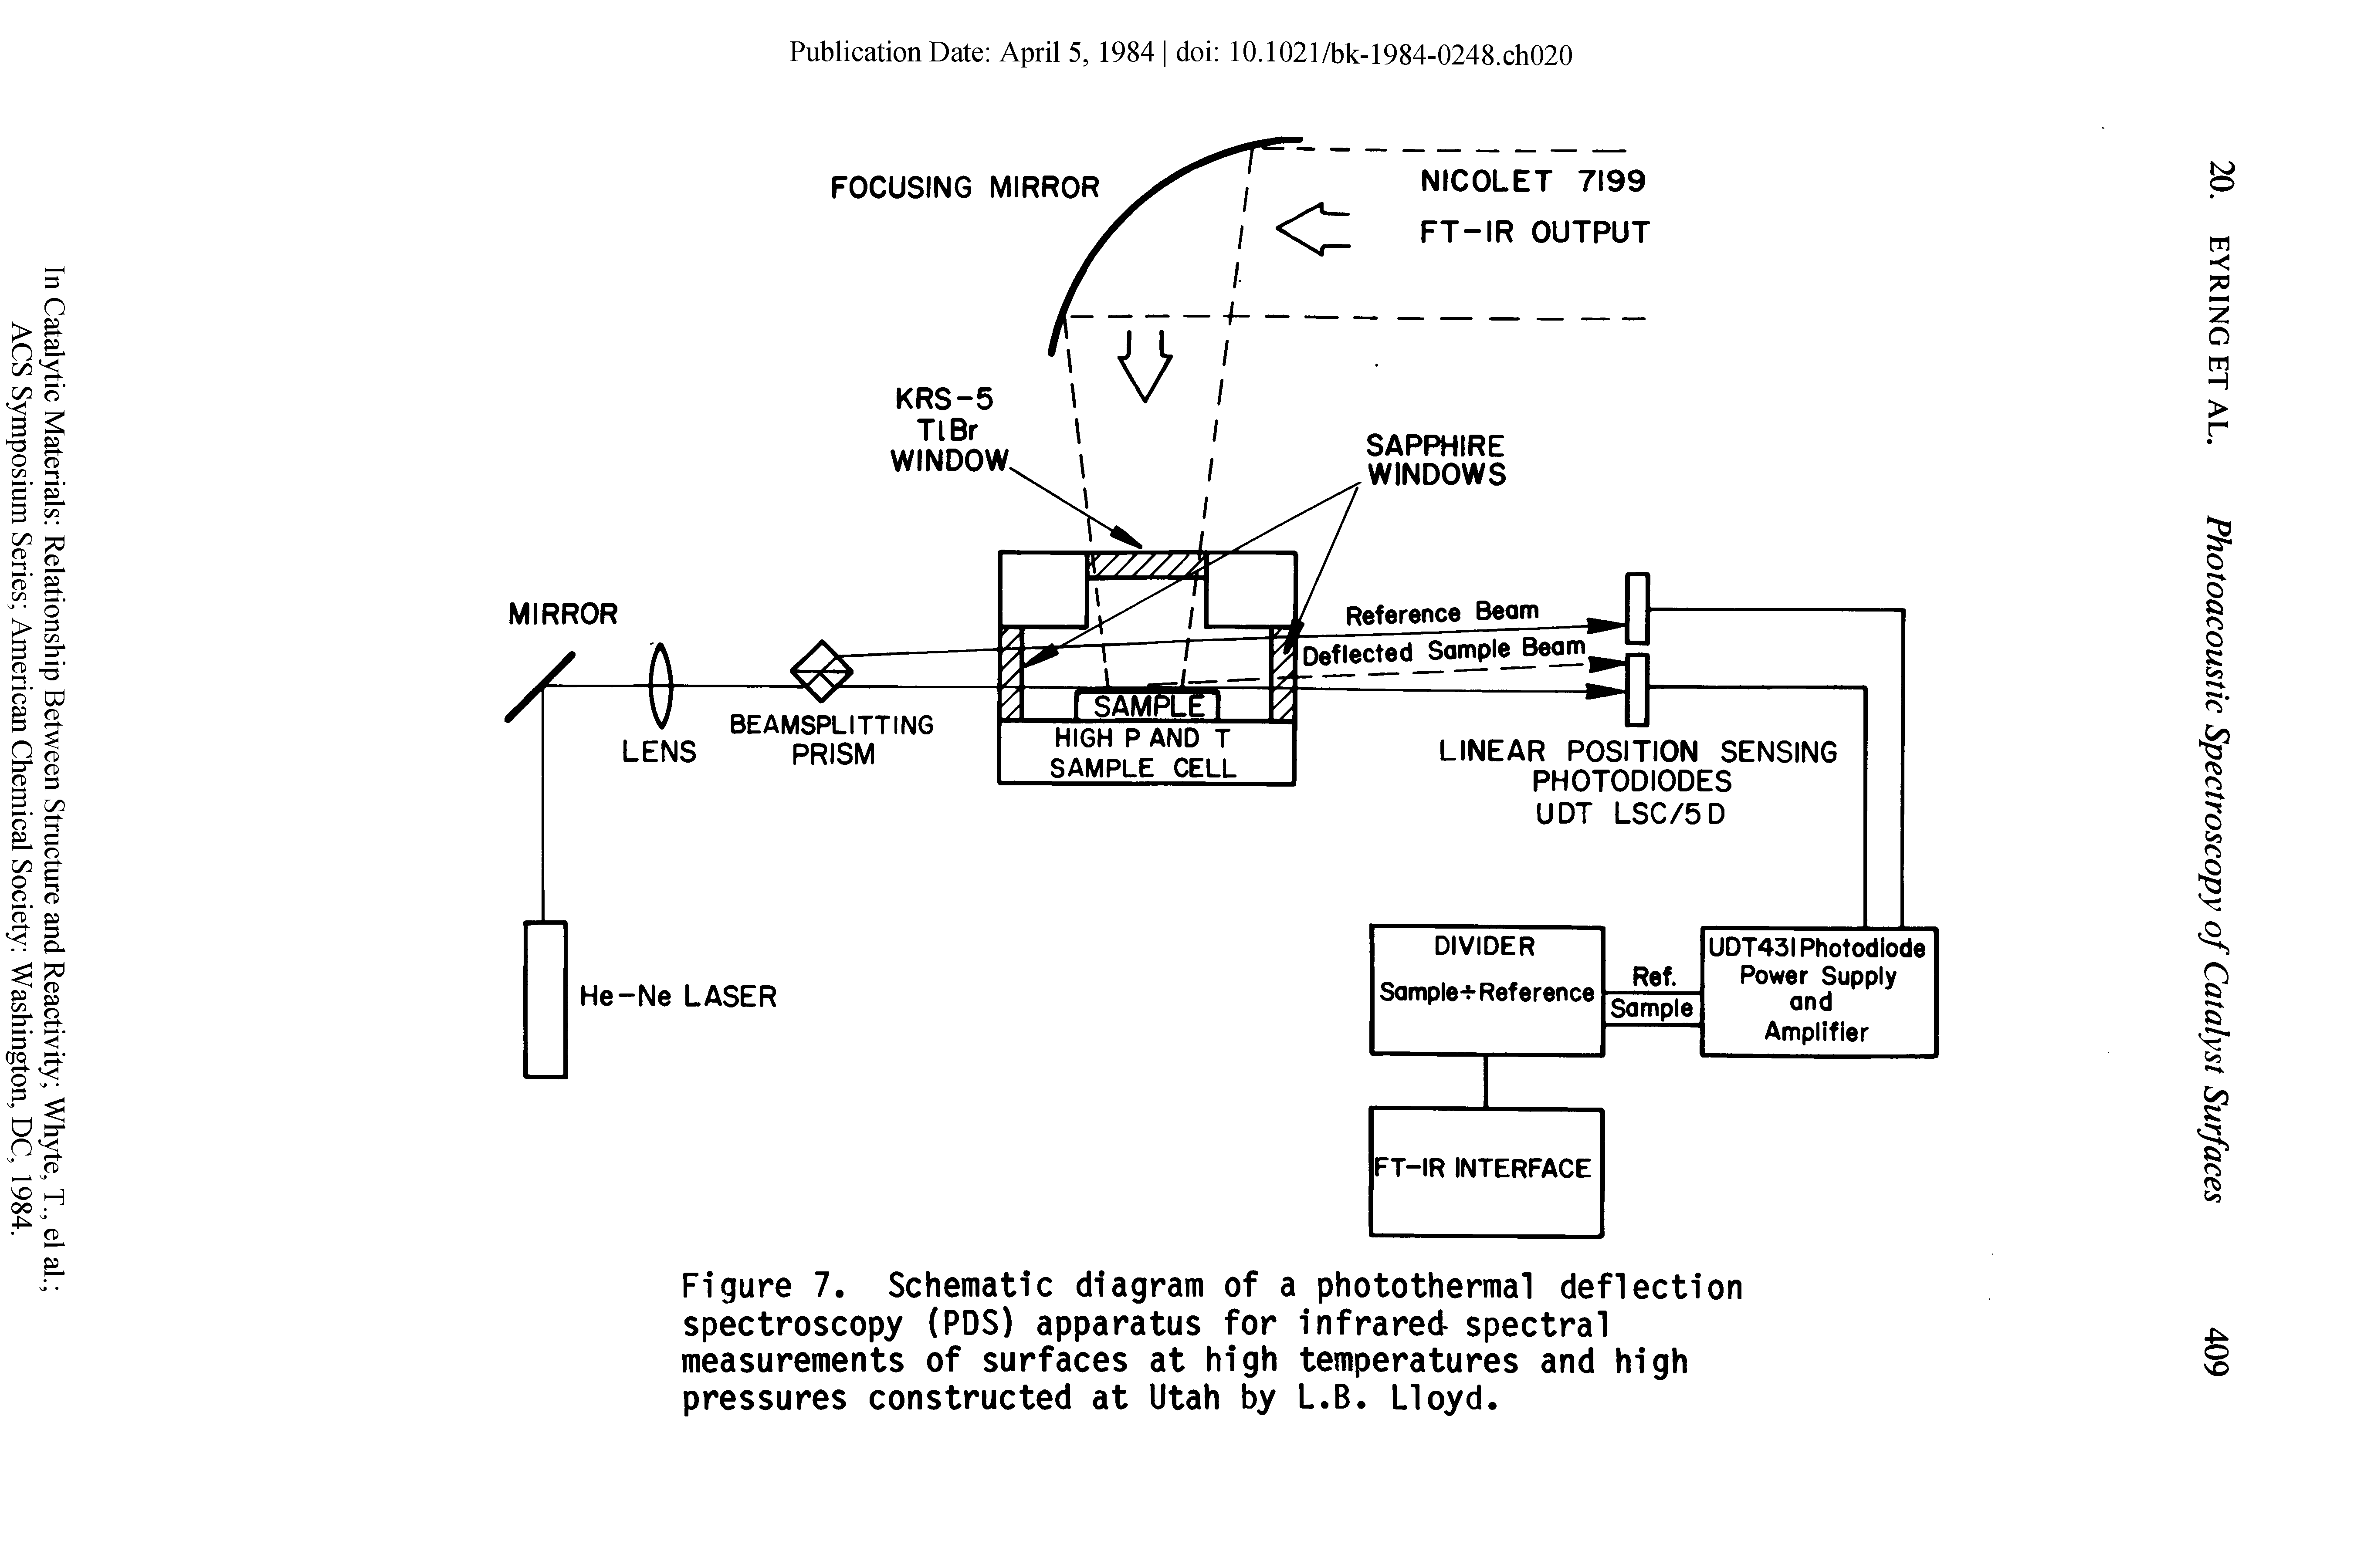 Figure 7. Schematic diagram of a photothermal deflection spectroscopy (PDS) apparatus for infrared- spectral measurements of surfaces at high temperatures and high pressures constructed at Utah by L.B. Lloyd.